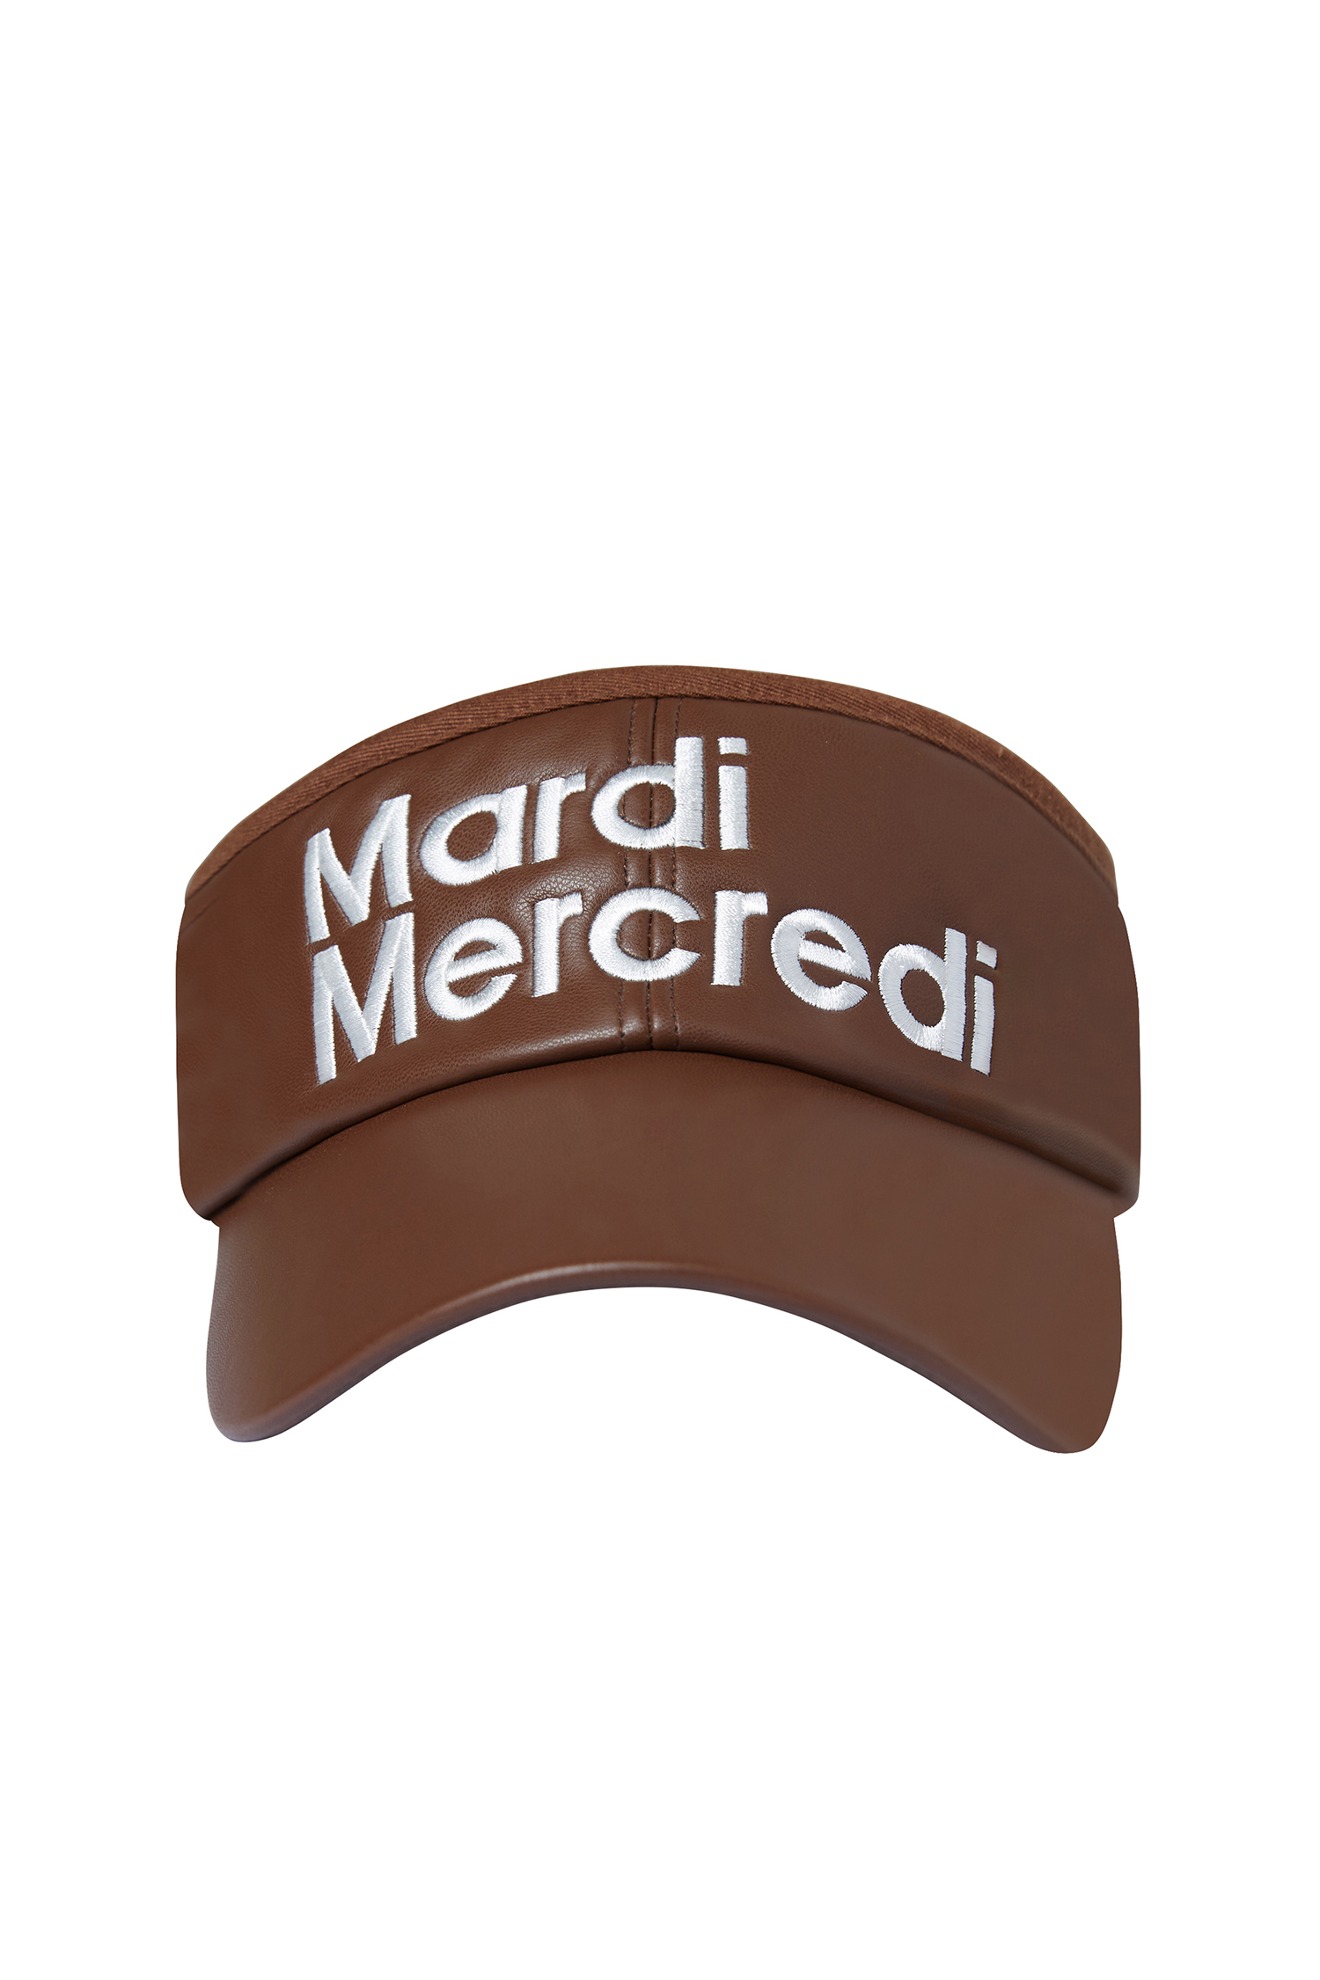 FAUX LEATHER SUN VISOR_BROWN IVORY